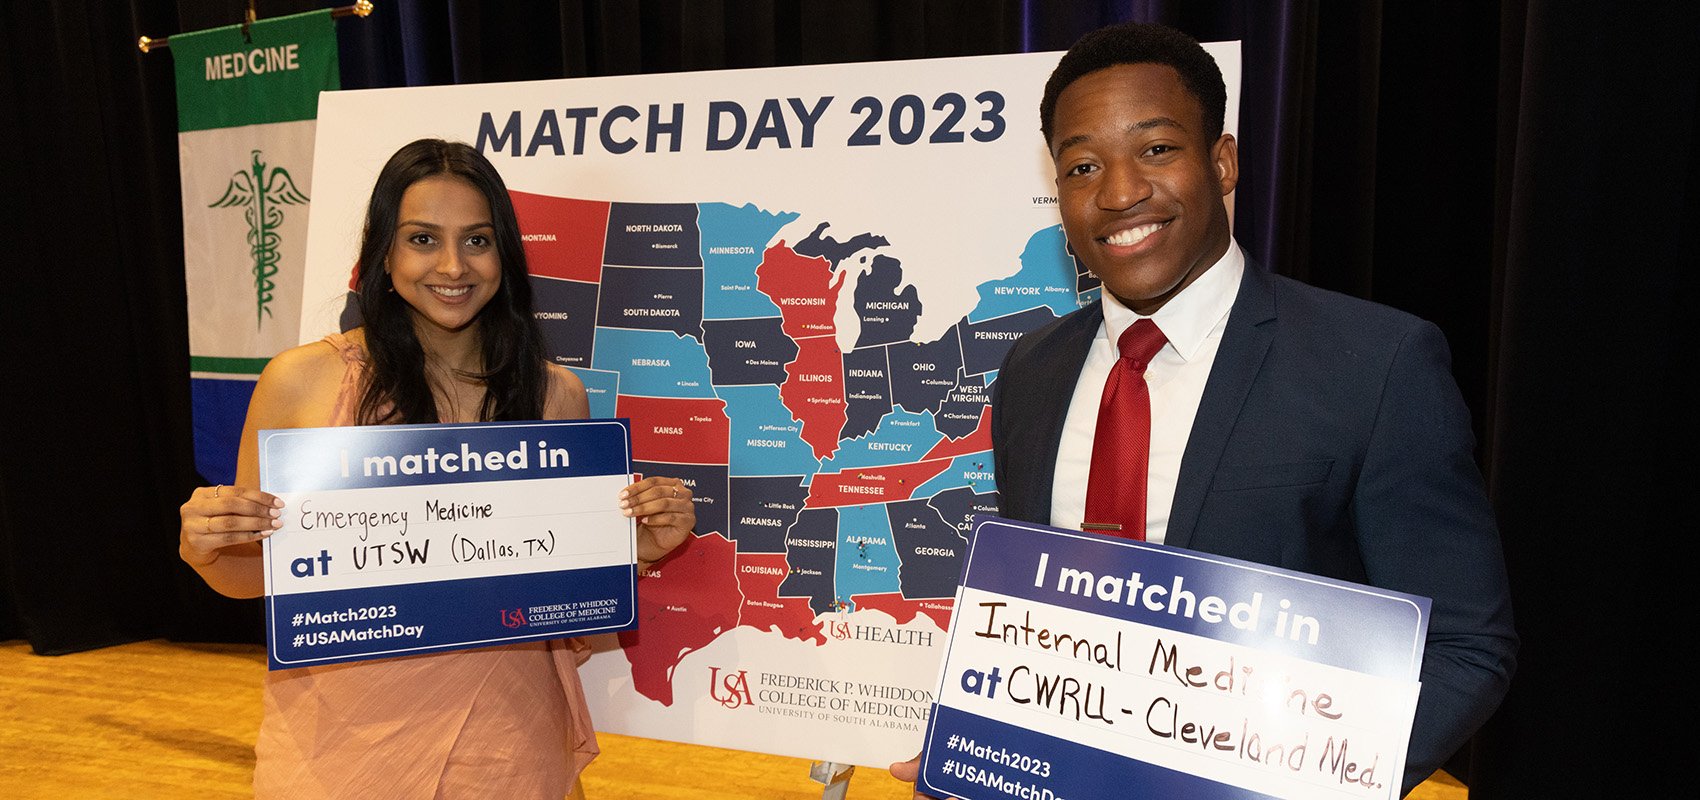 The Whiddon College of Medicine's Match Day in 2023